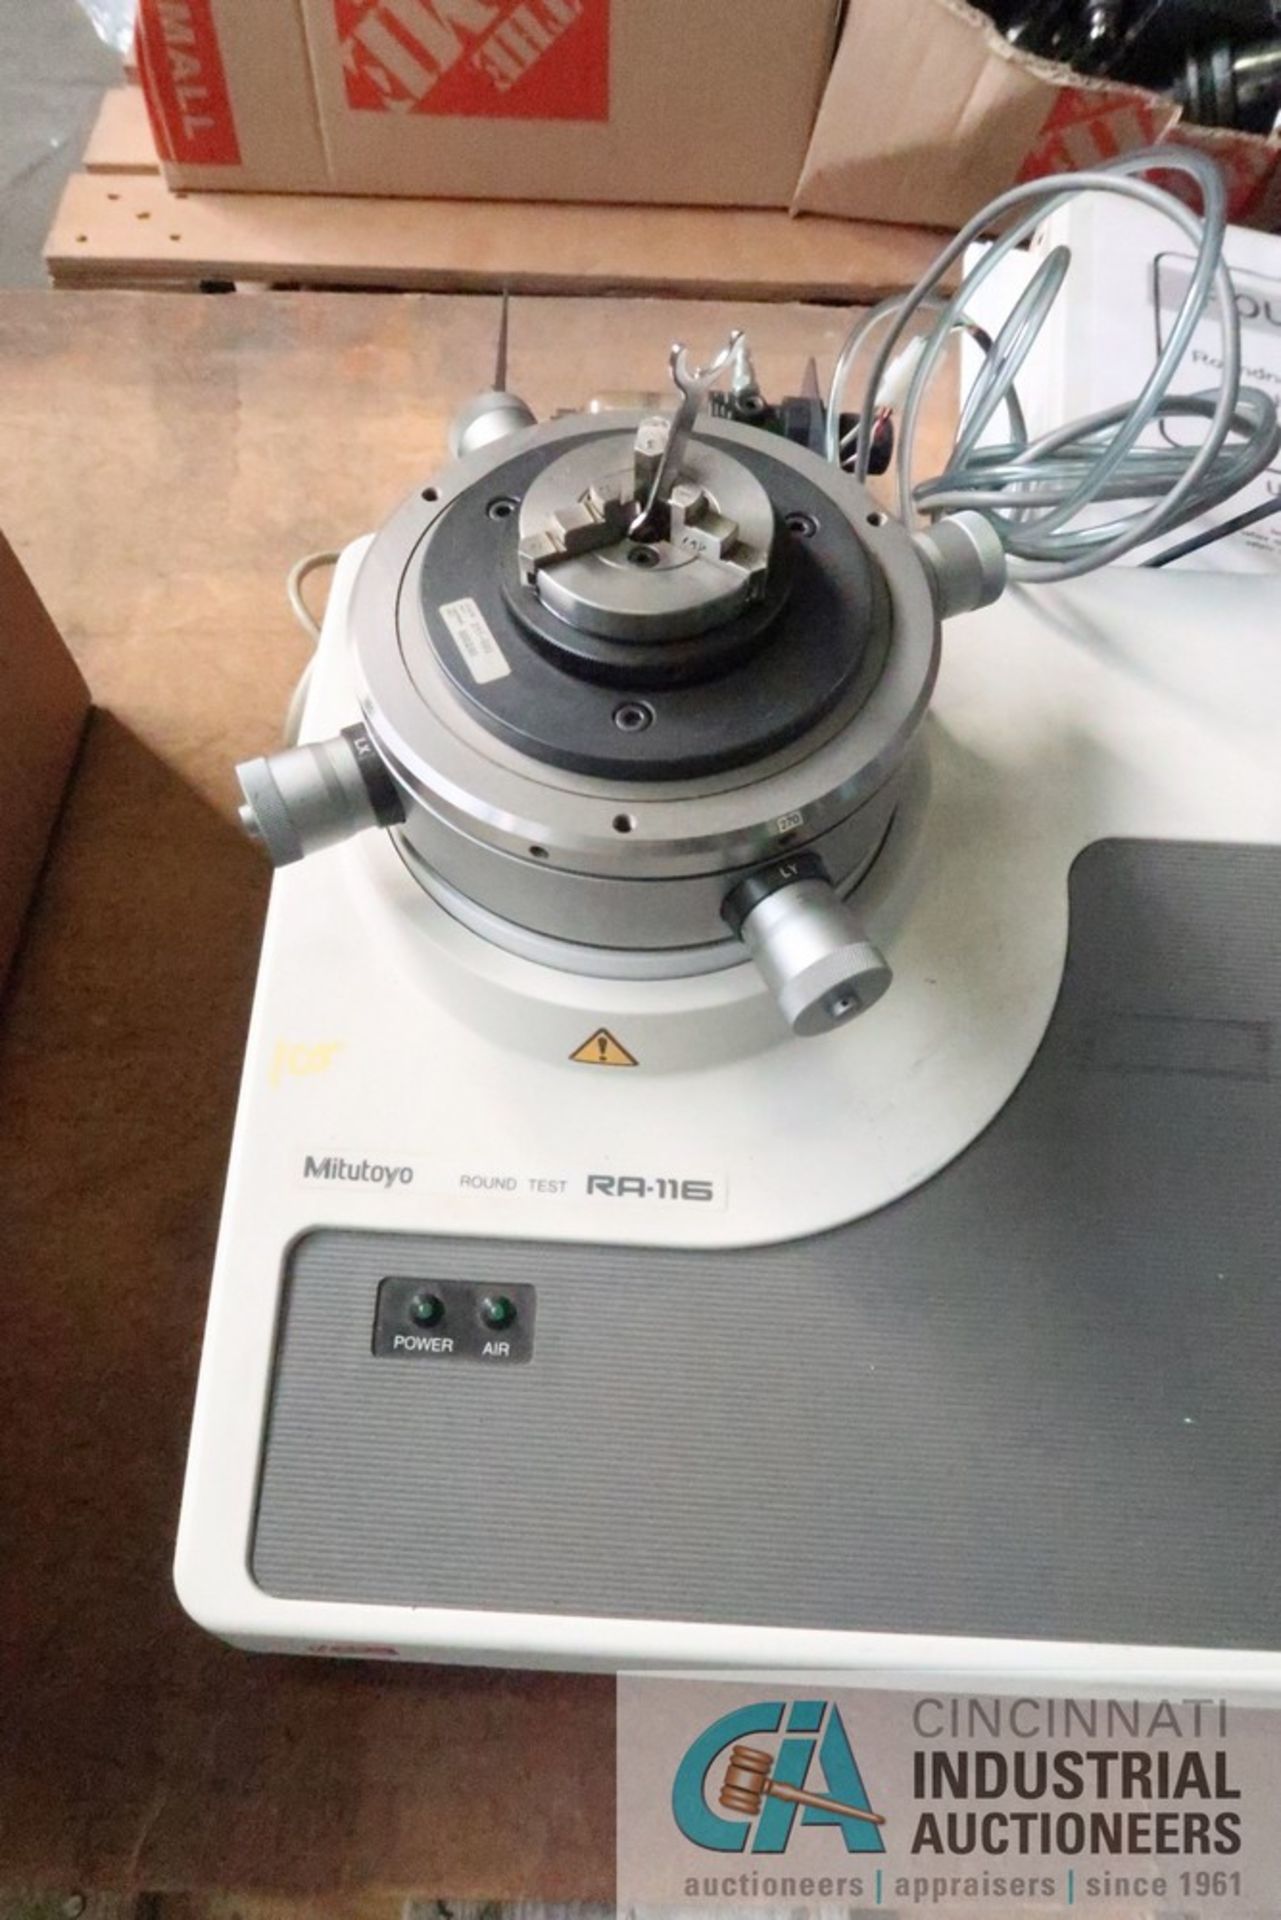 MITUTOYO MODEL RA-116 ROUNDNESS TESTER; S/N 200112 - Out of Service - Image 7 of 8